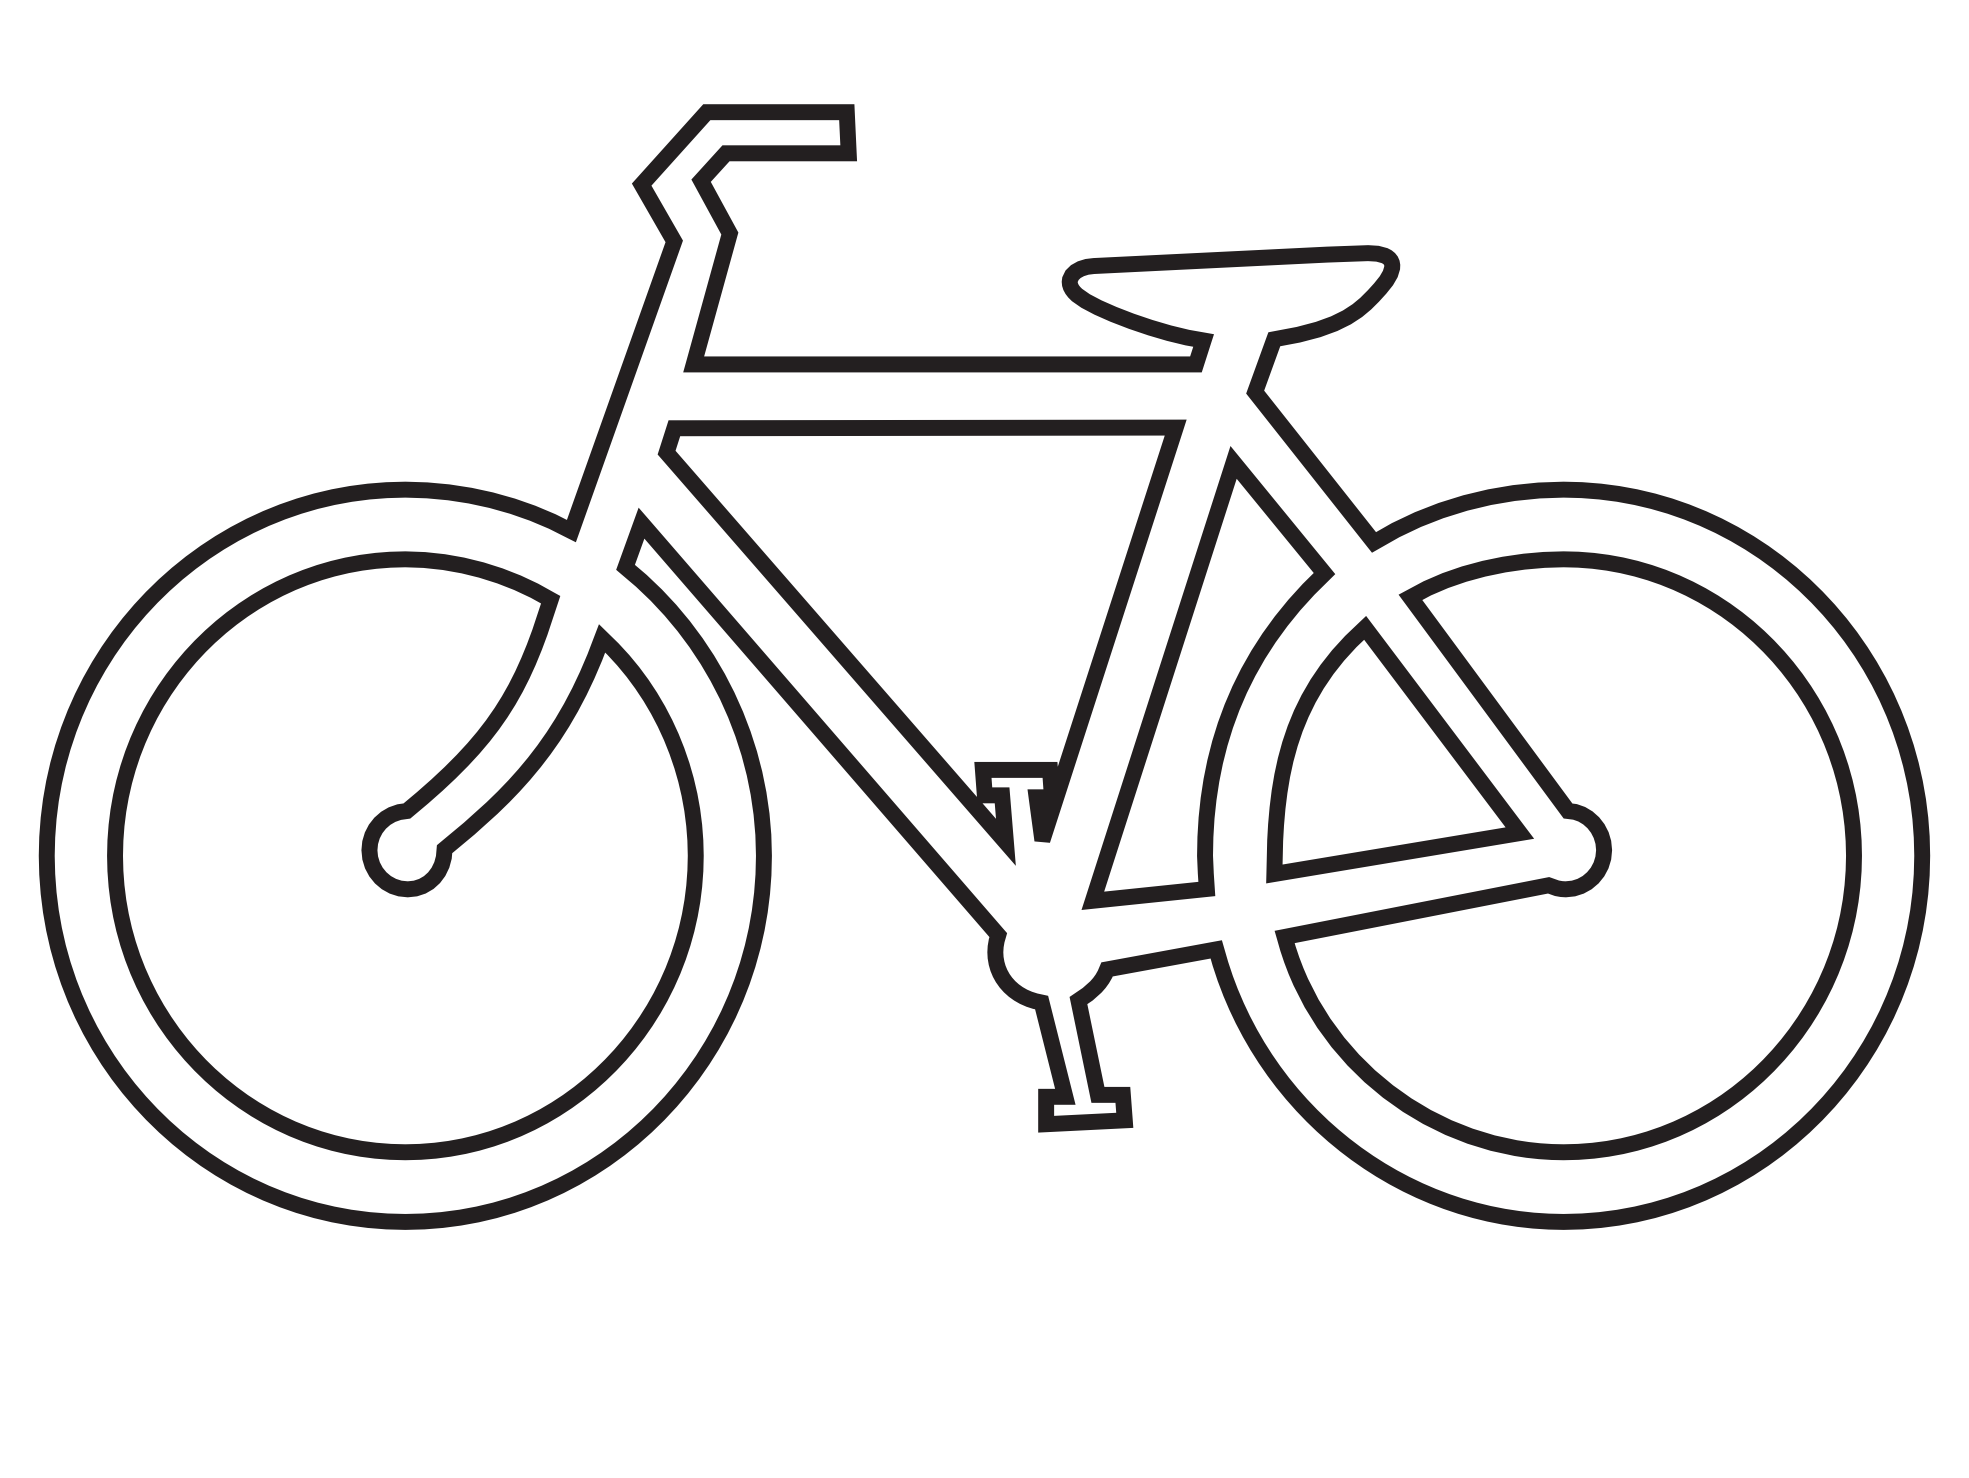 Cycle Drawing - ClipArt Best